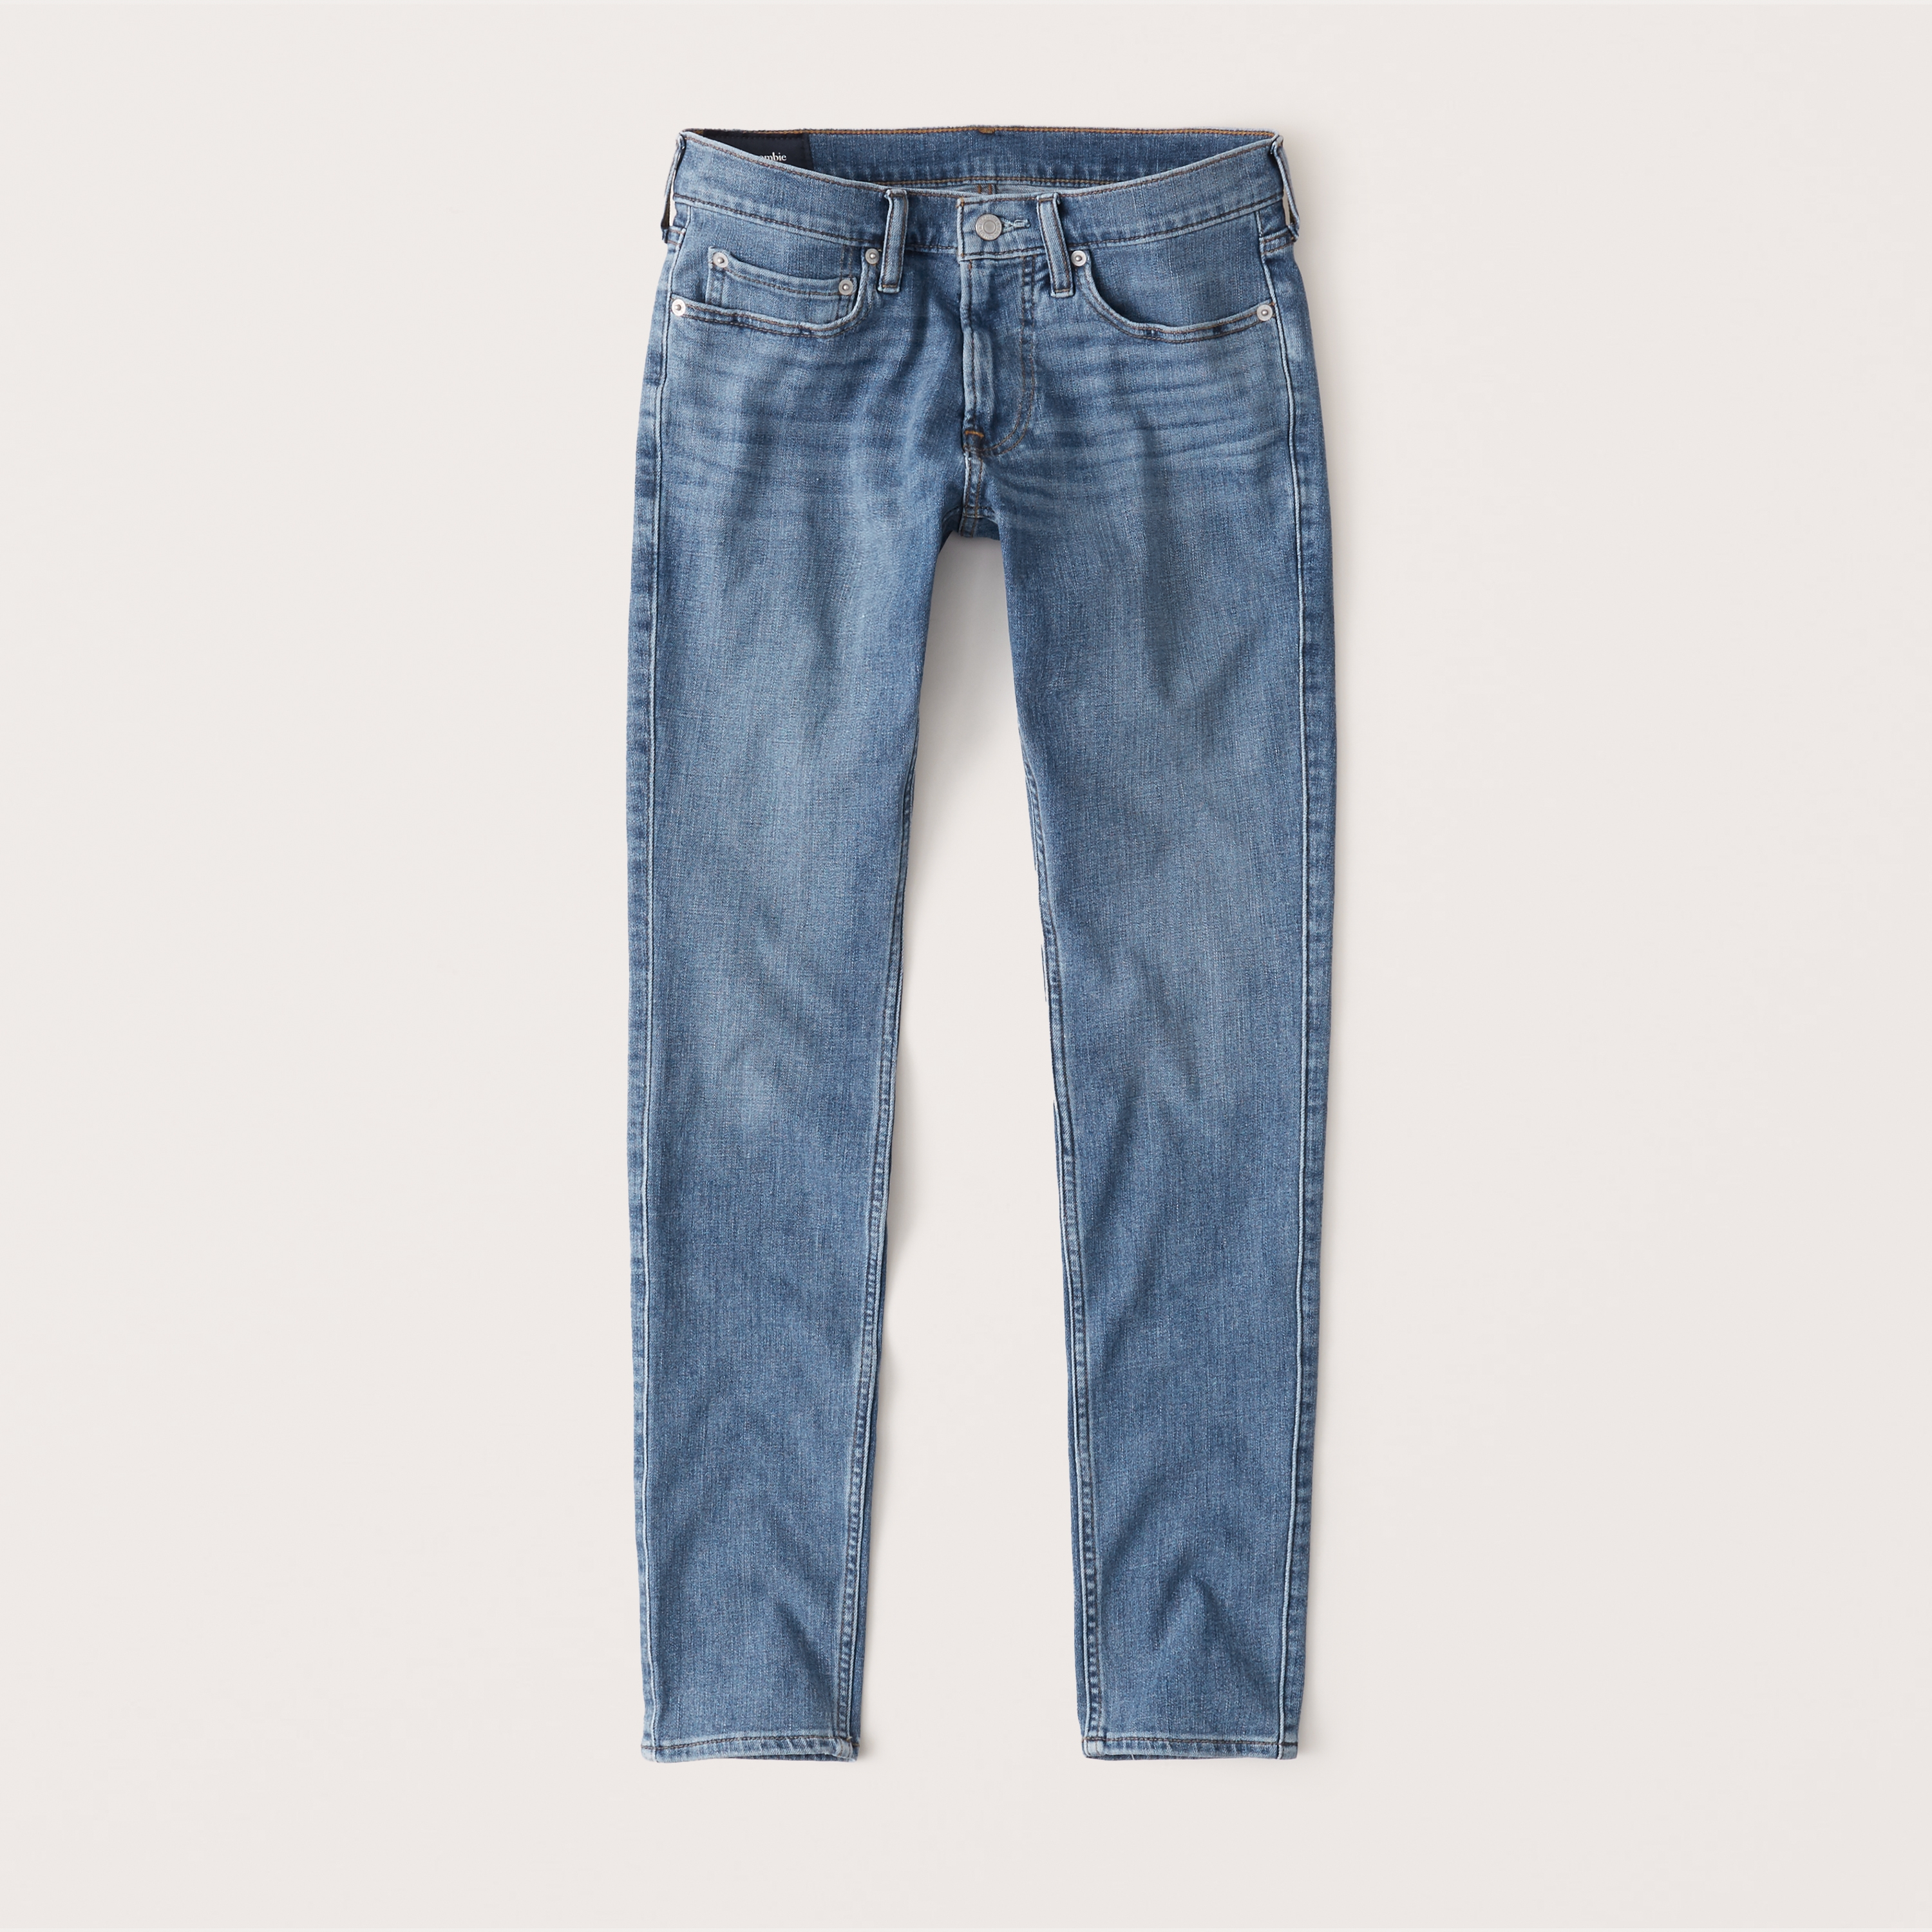 abercrombie fitch extreme skinny